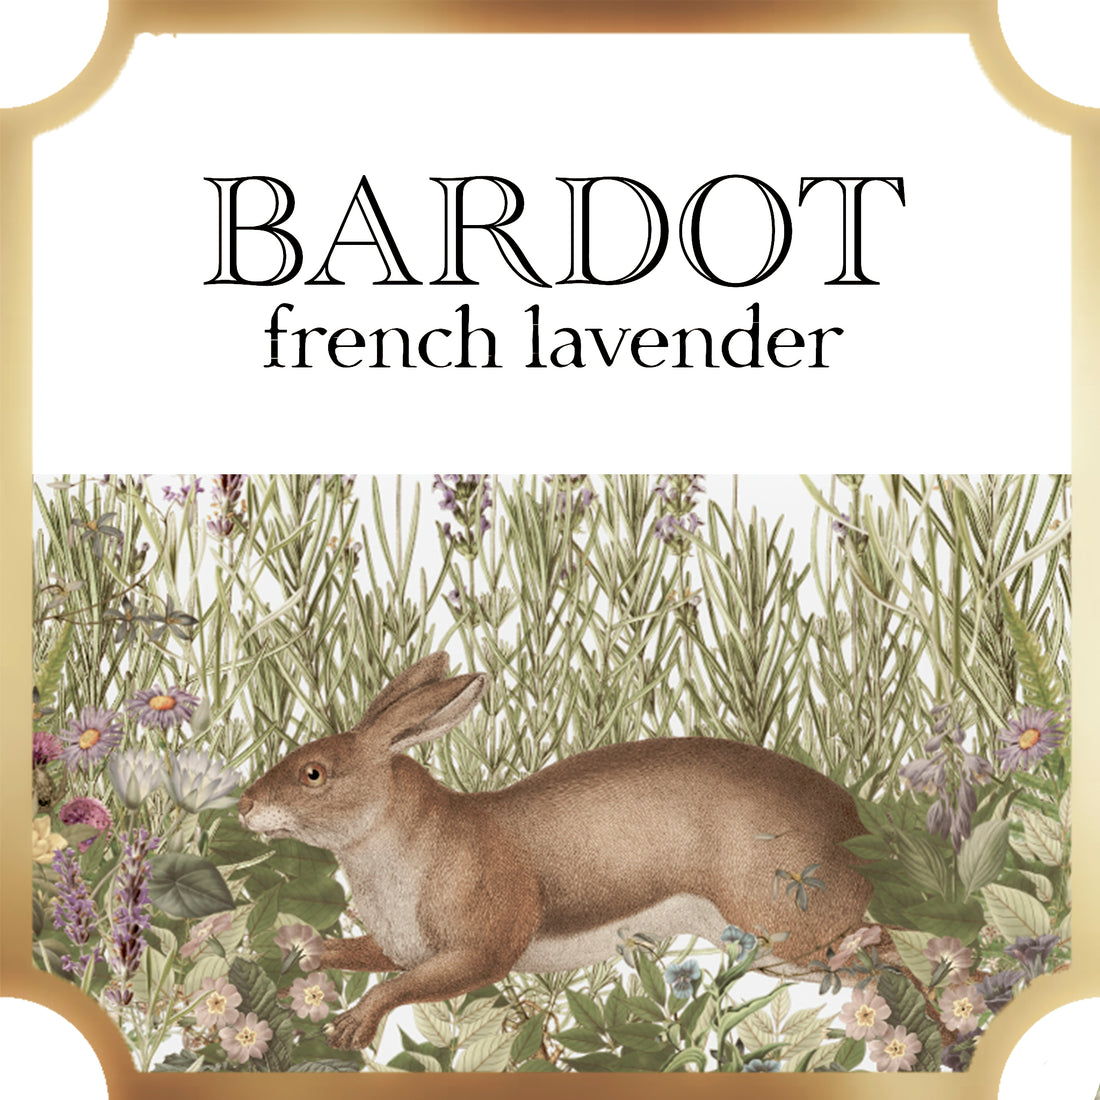  bardot collection a pleasant thought